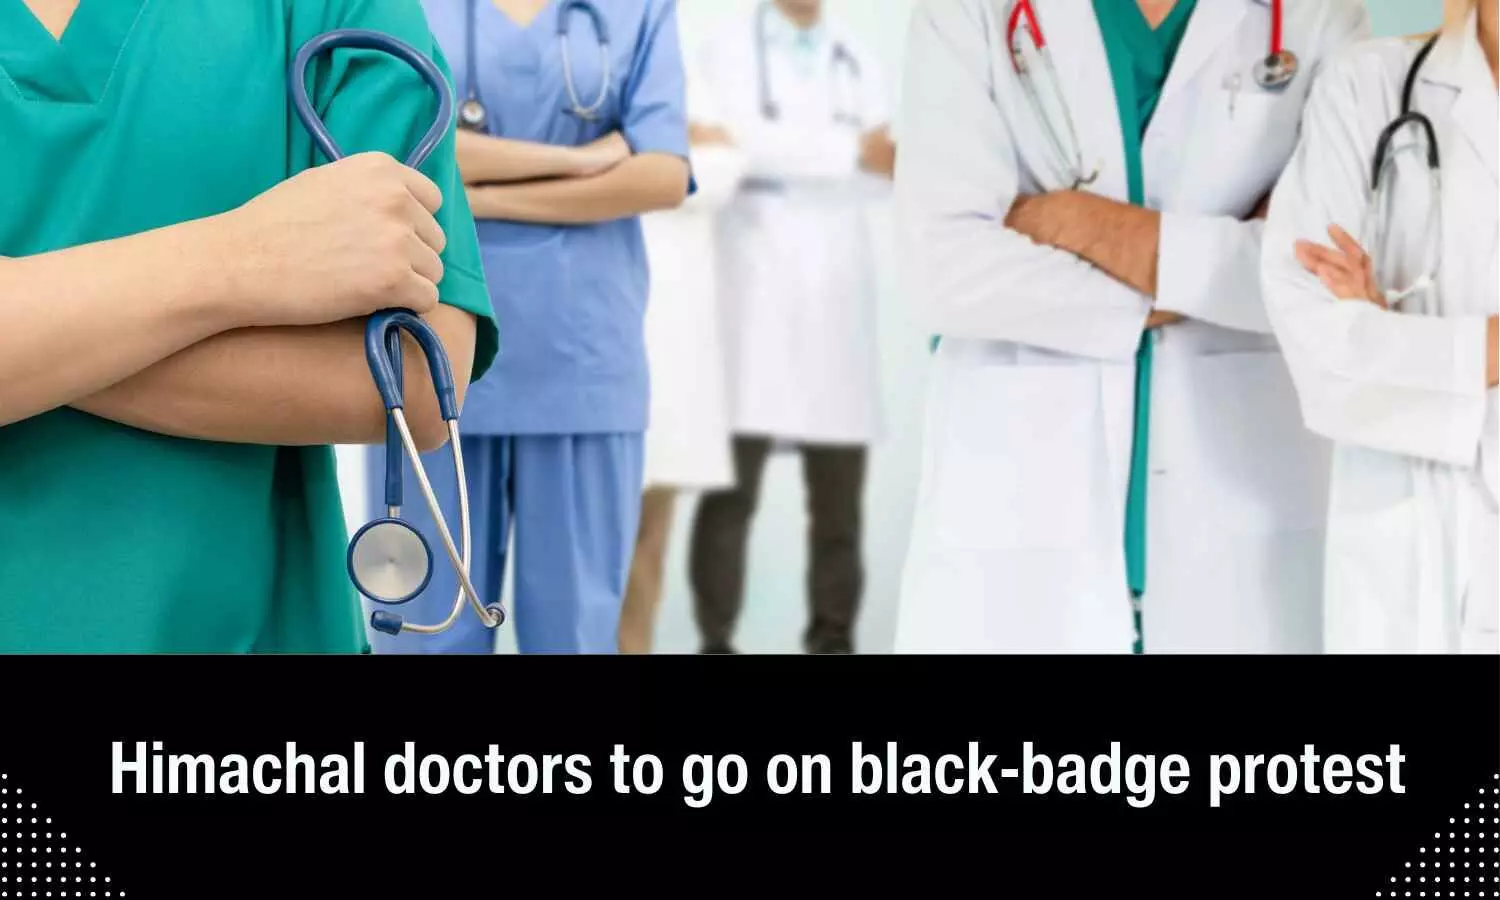 Himachal doctors to initiate black-badge protest over denial of non-practicing allowance